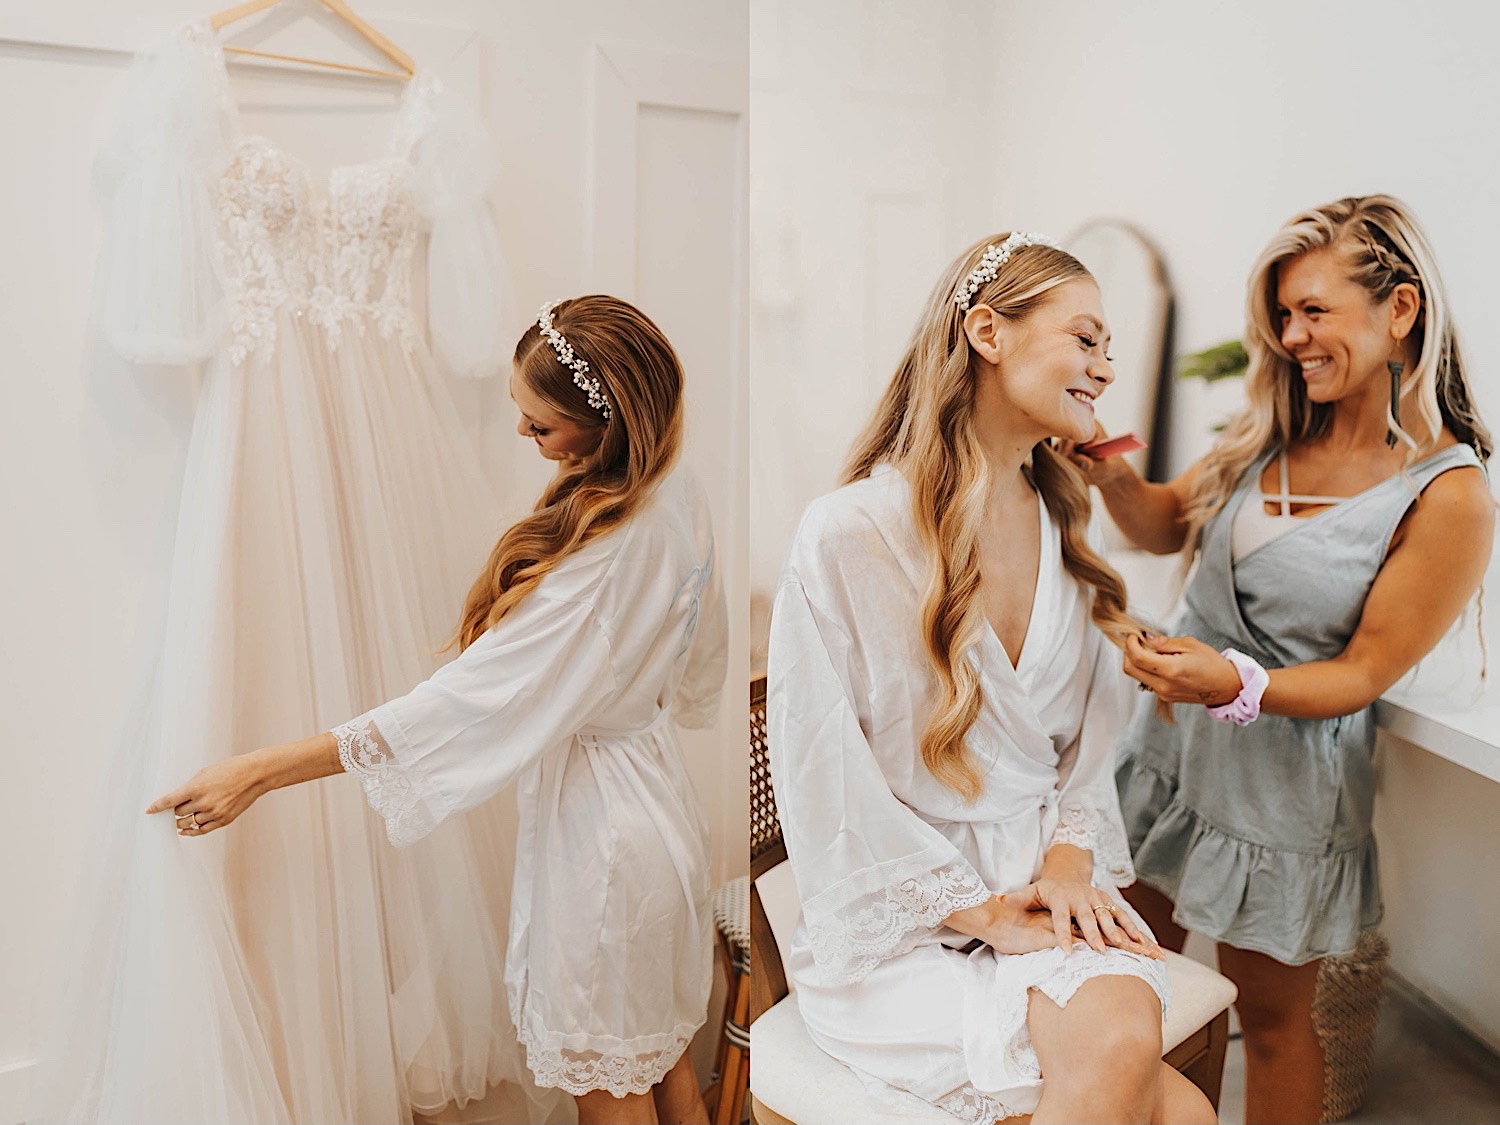 2 photos side by side, the left is of a bride looking at and touching her wedding dress as it hangs on a wall in front of her, the right is of the bride sitting in a chair getting her hair and makeup done for her wedding day